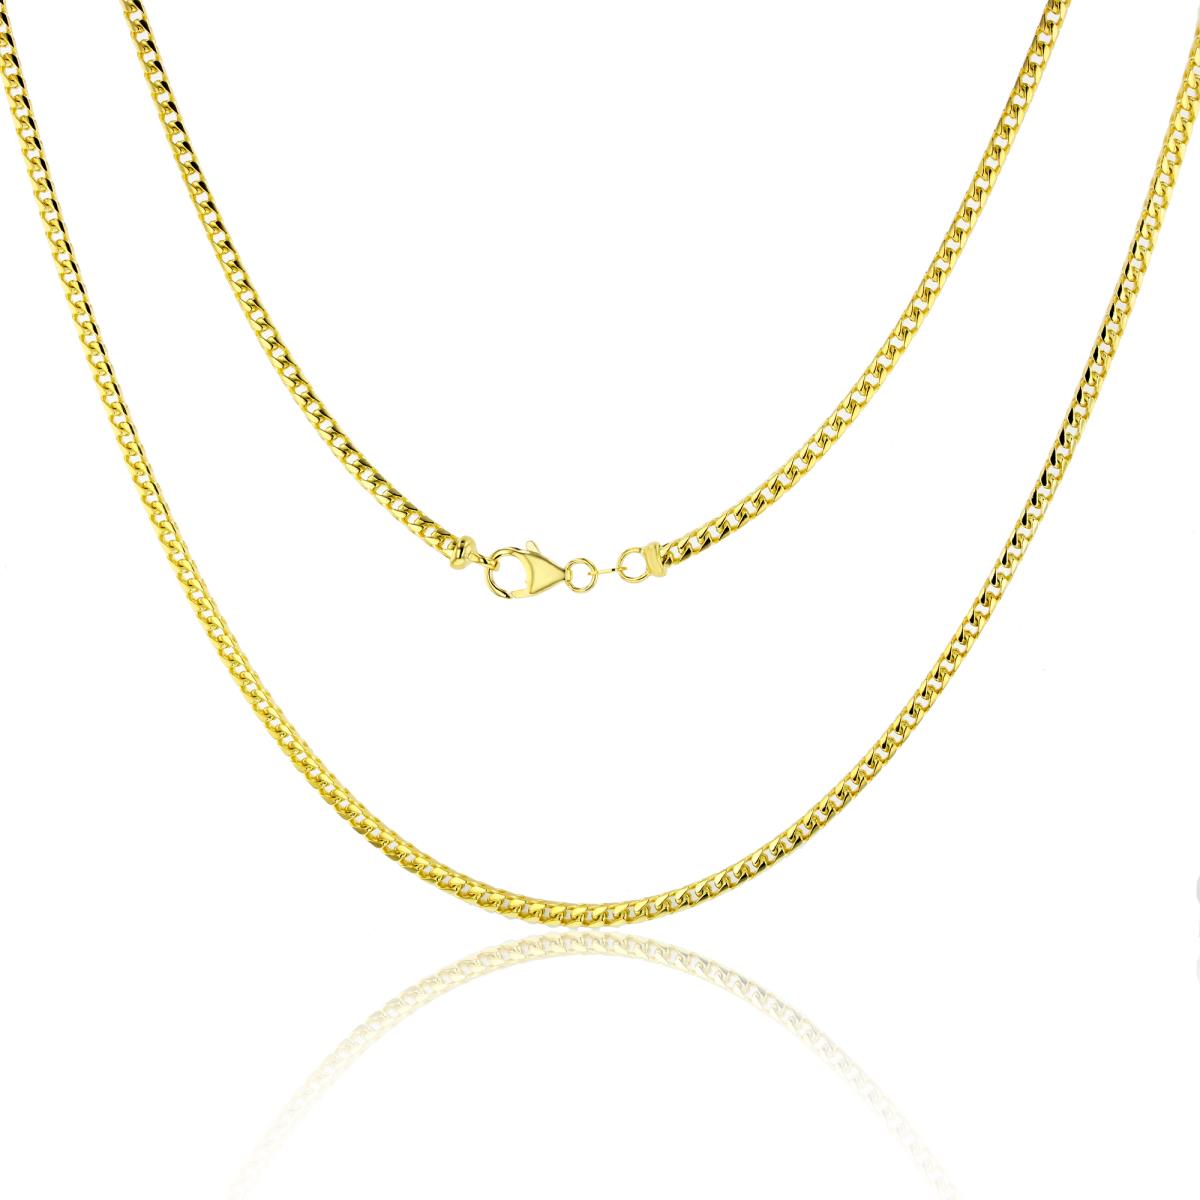 14K Yellow Gold 3.00mm 24" 100 Solid Franco Chain